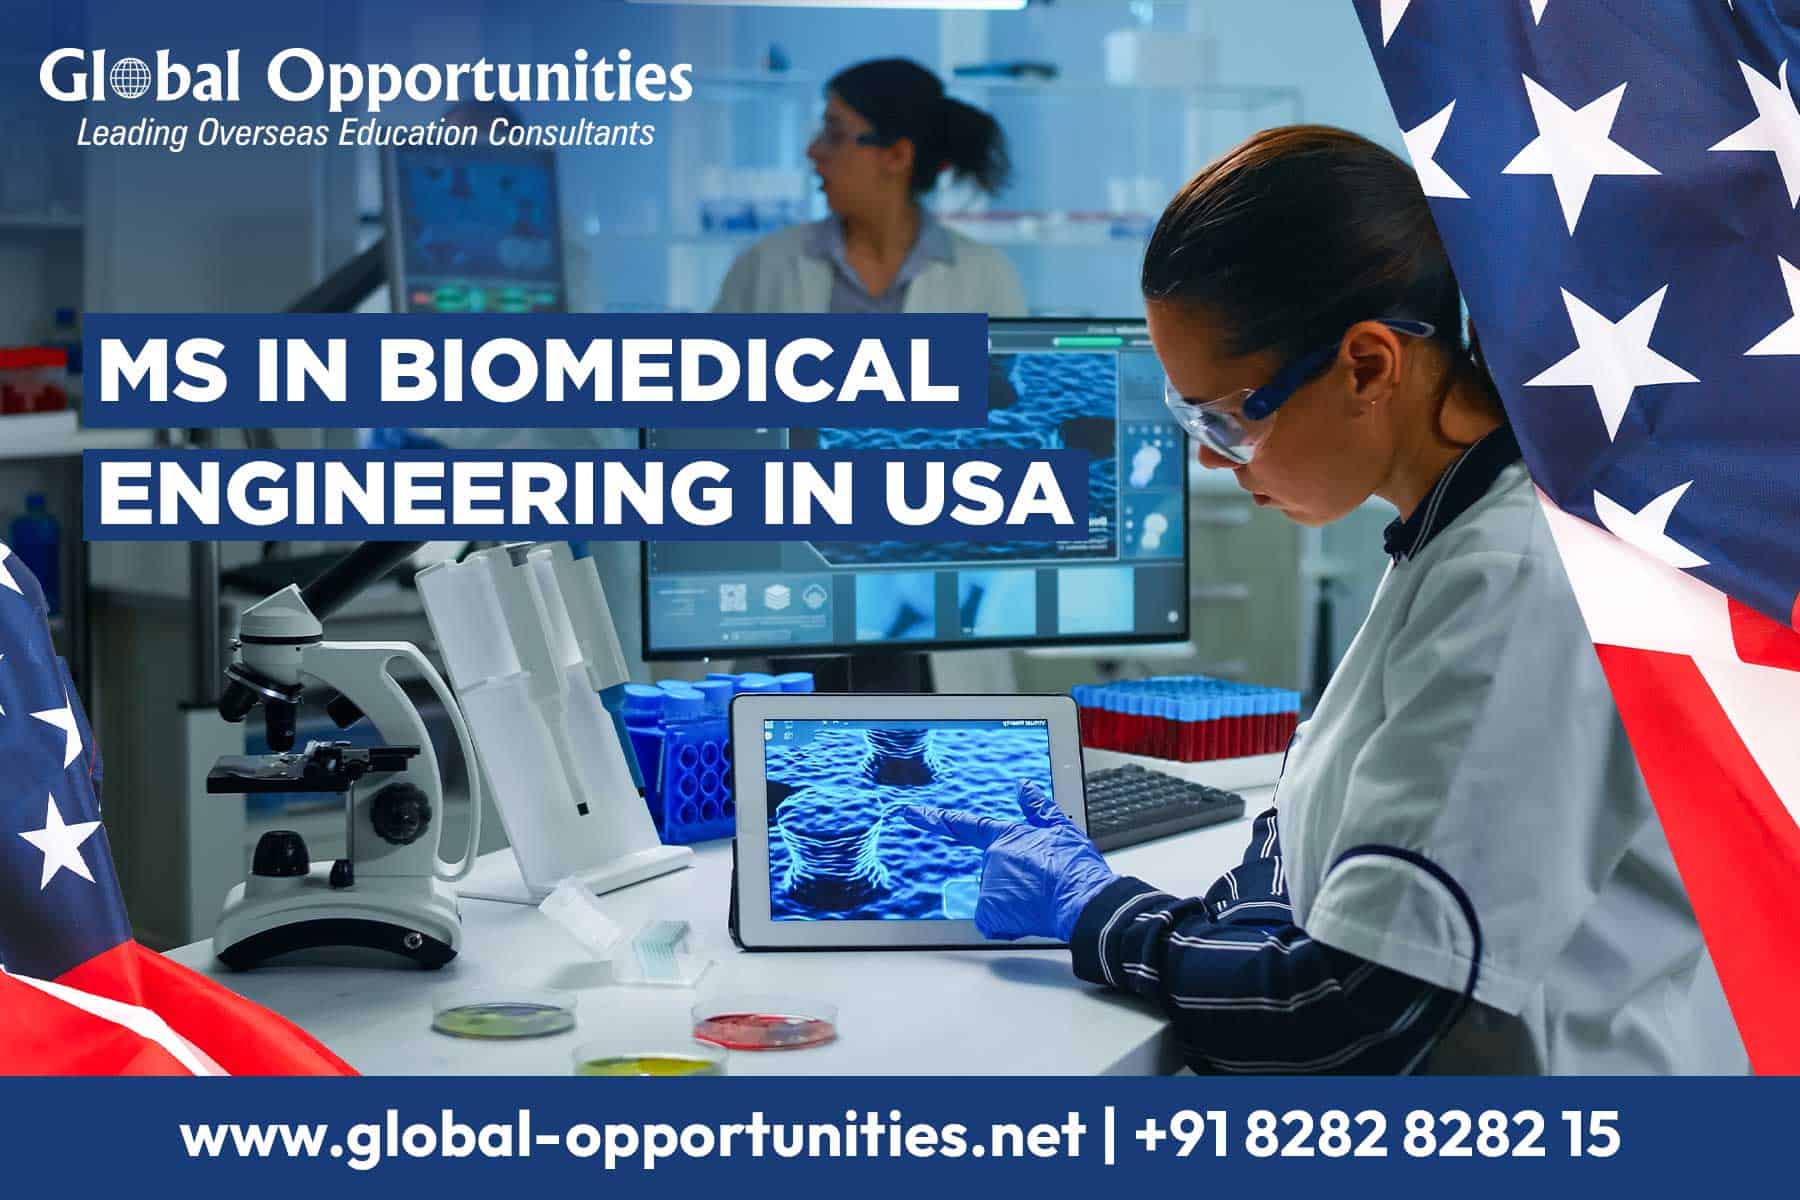 MS in Biomedical Engineering in USA